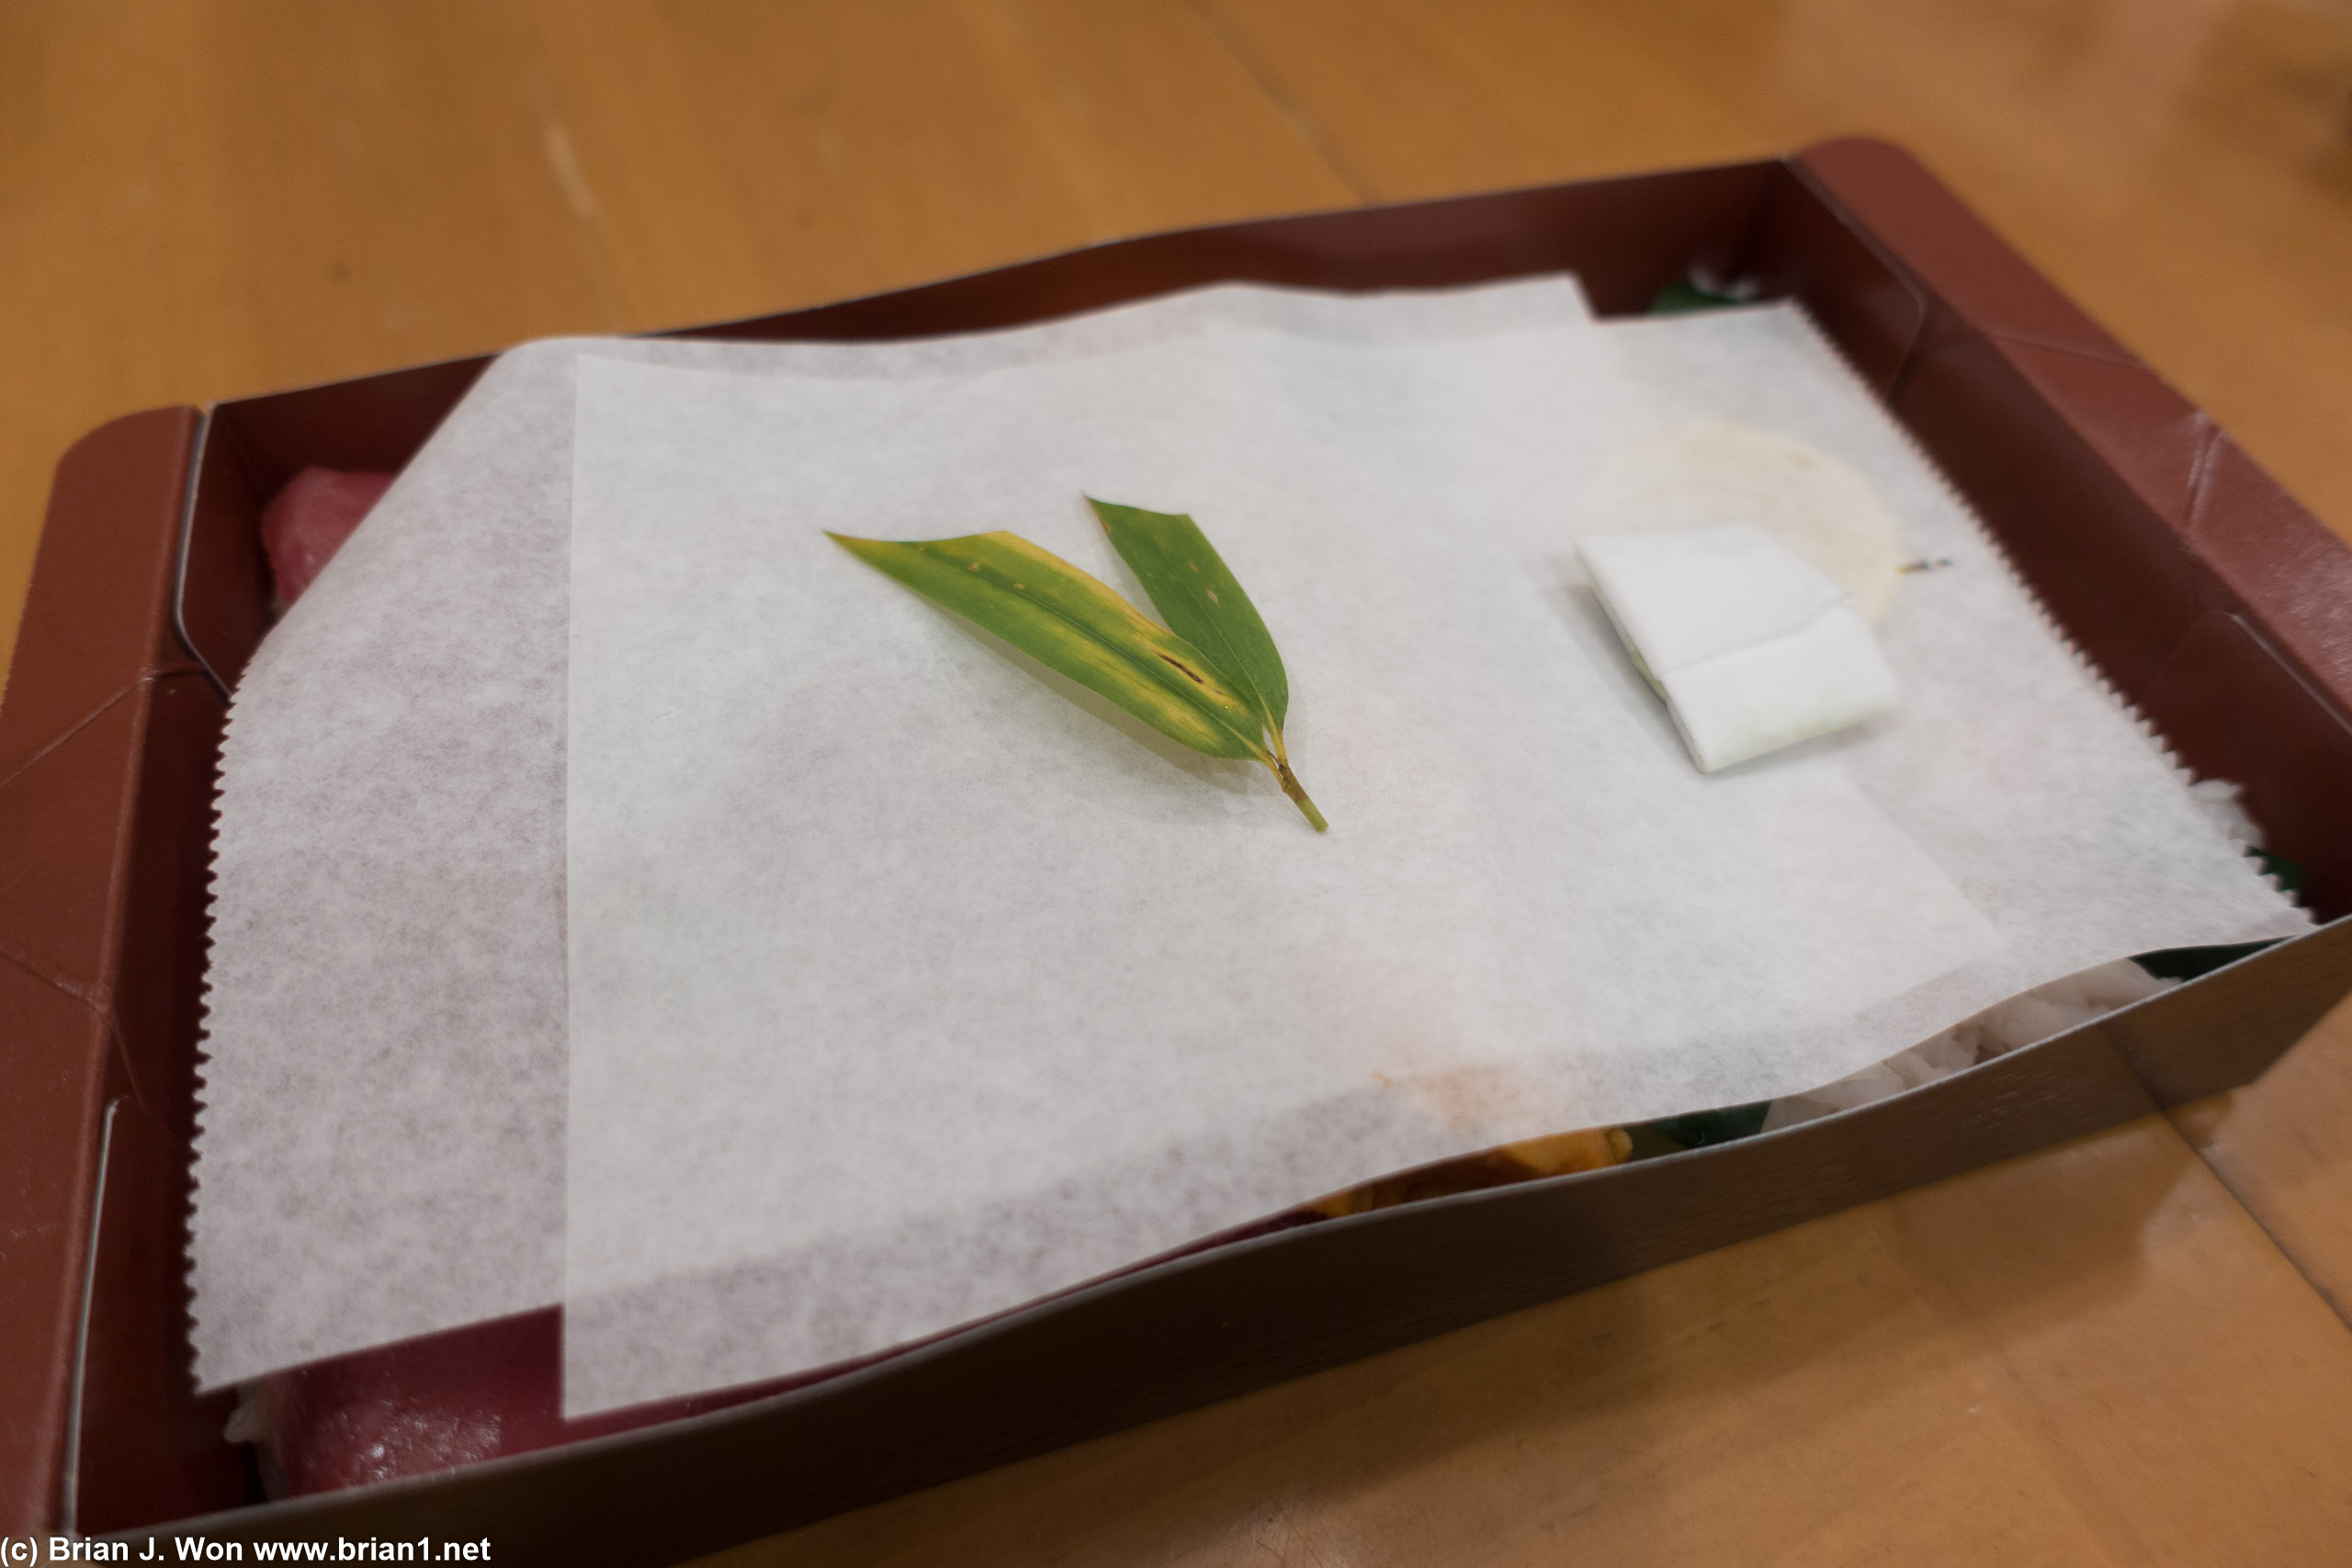 What lies underneath the wax paper and decorative leaf?